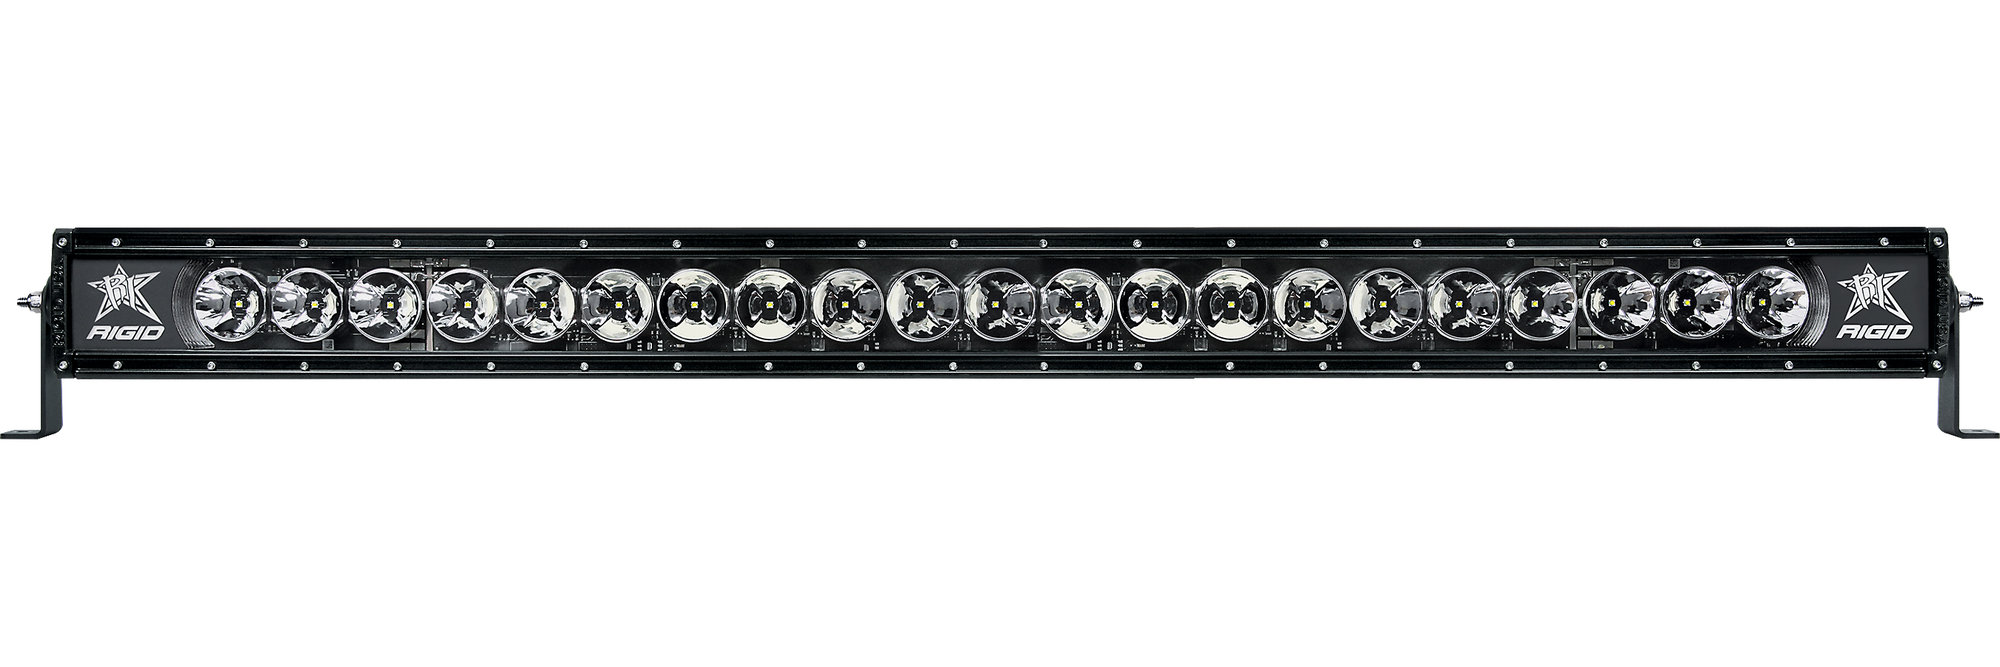 TRACTION 4X4 - LED BAR XT 240W CURVED - 18400lm